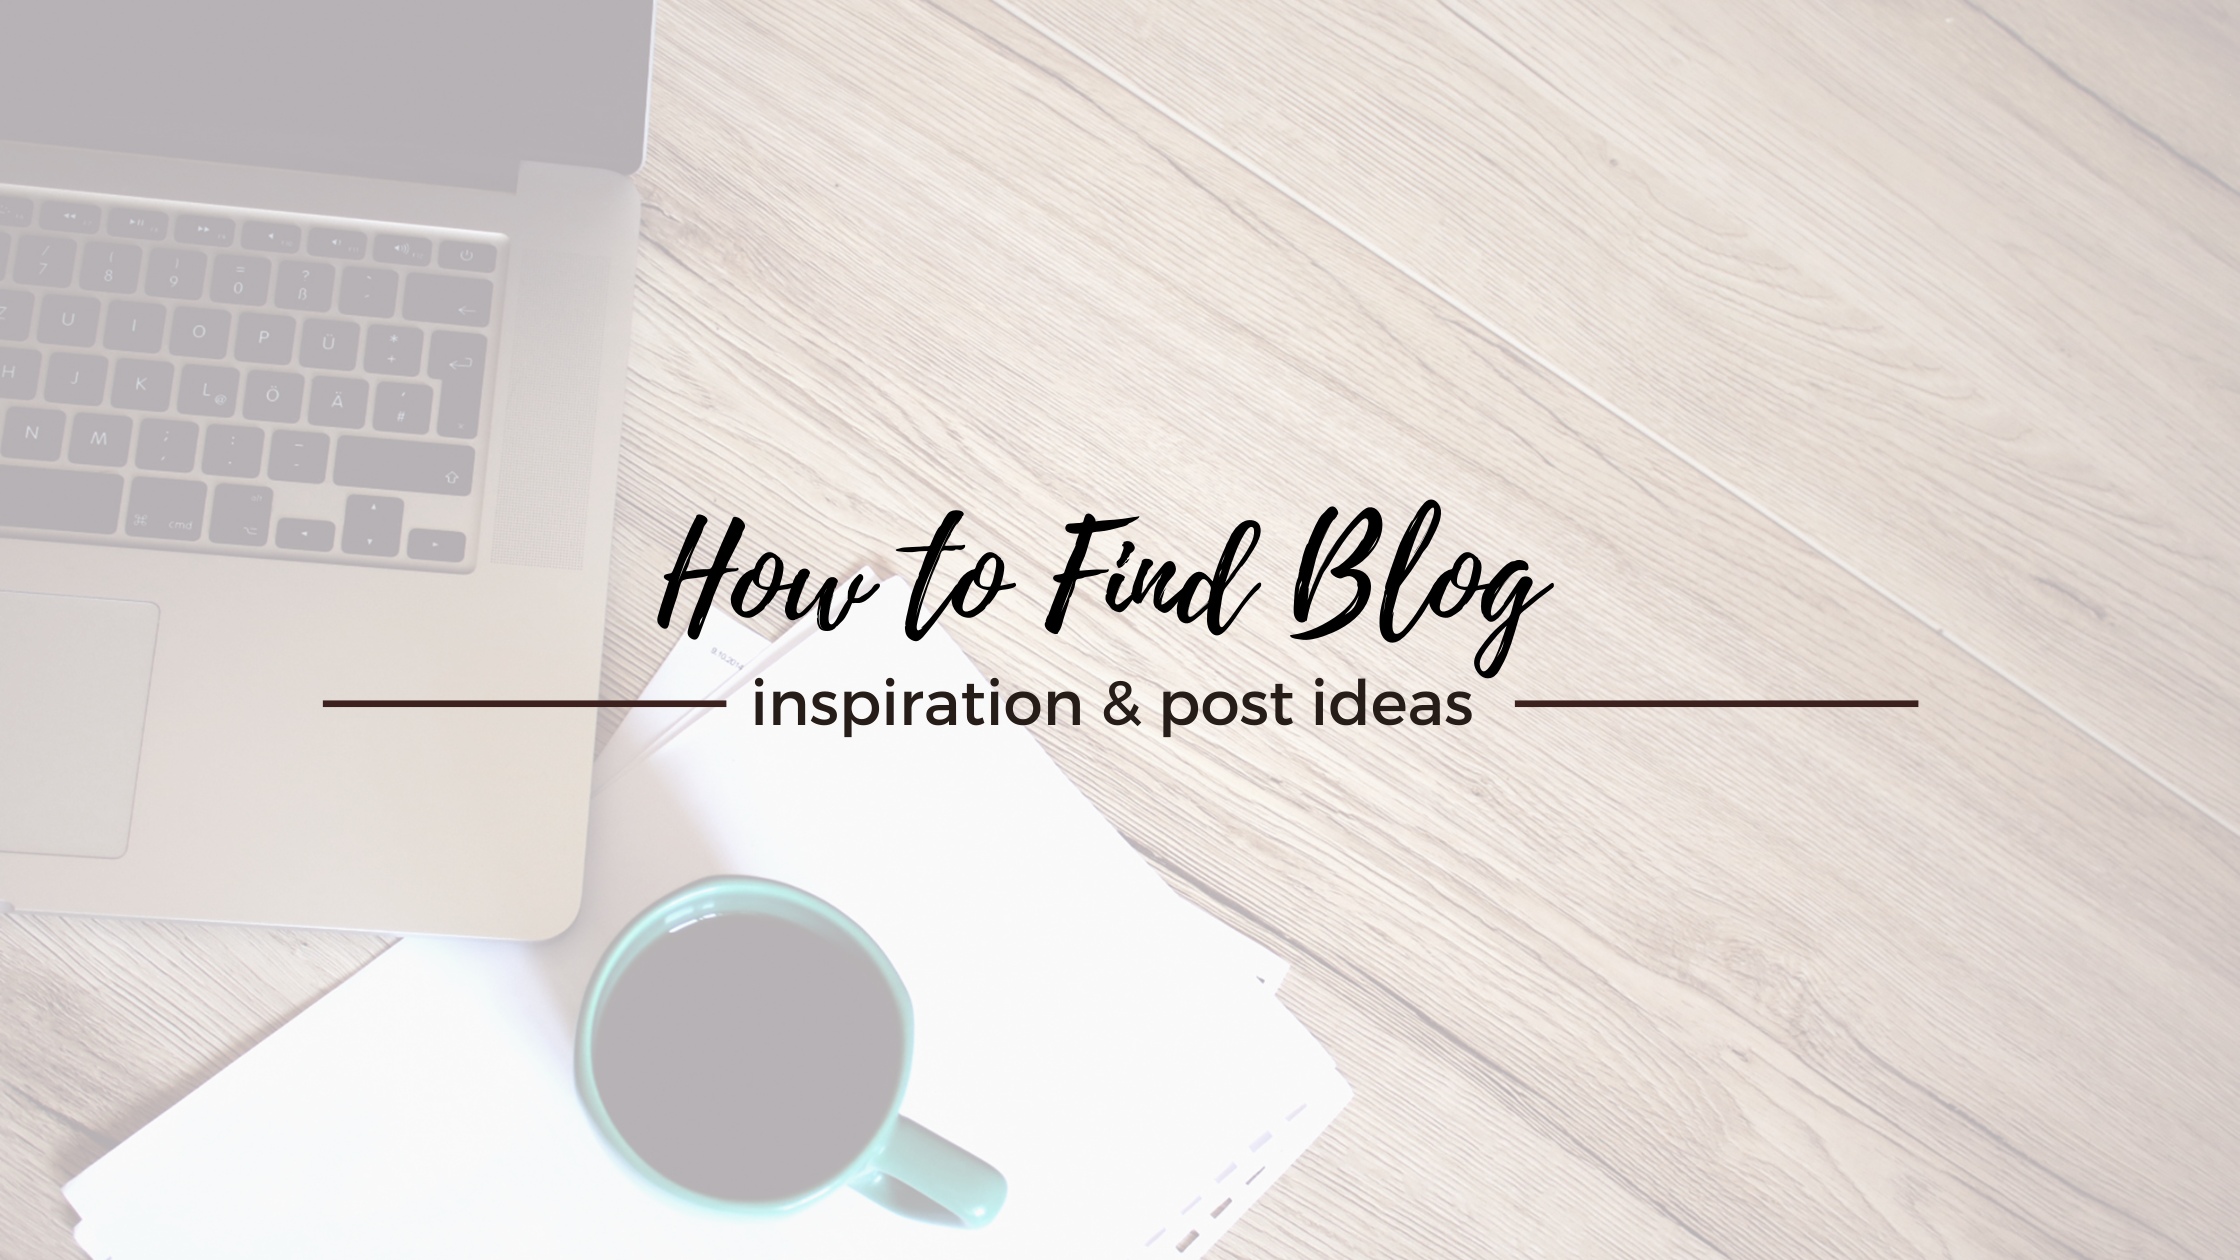 How to Find Blog Inspiration